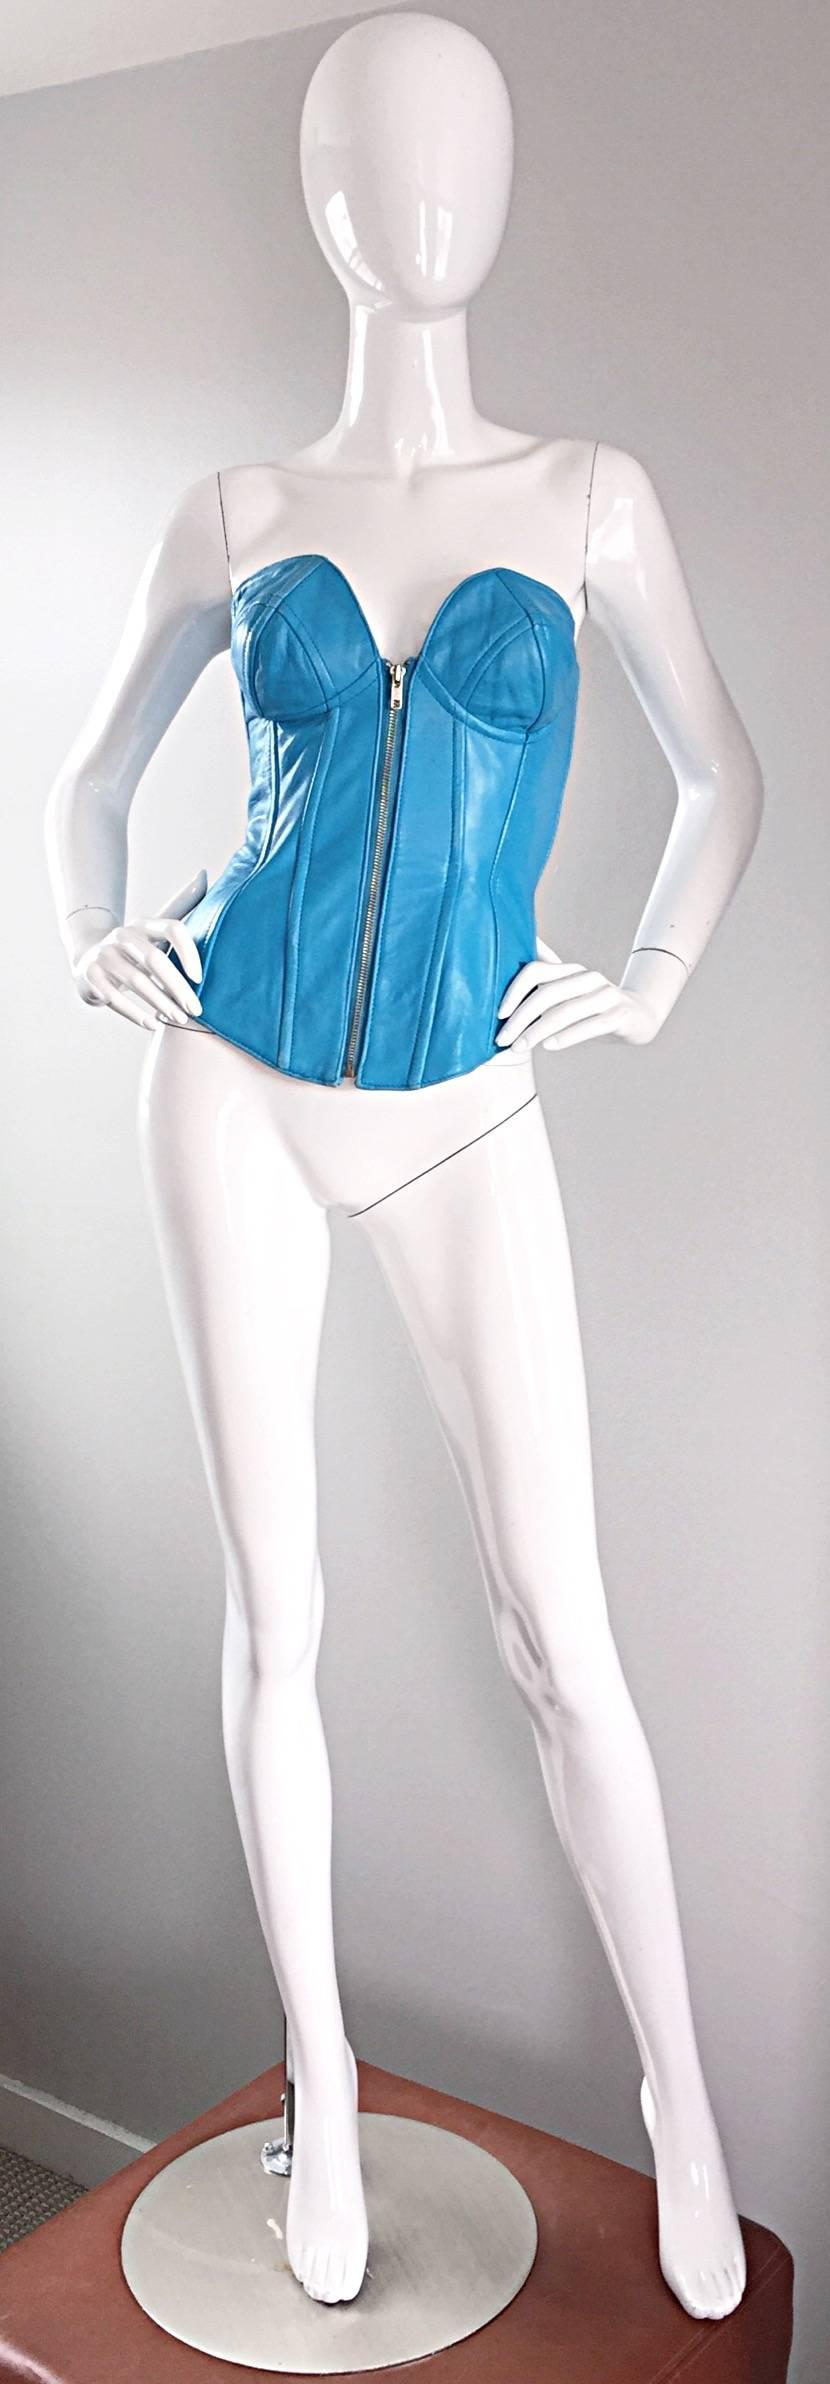 Sexy vintage NORTH BEACH LEATHER, by MICHAEL HOBAN, turquoise blue leather corset/bustier! Features a full silver metal zipper up the bodice. Intricate stitching throughout, and super flattering. Fully lined. Can easily be dressed up or down. Goes